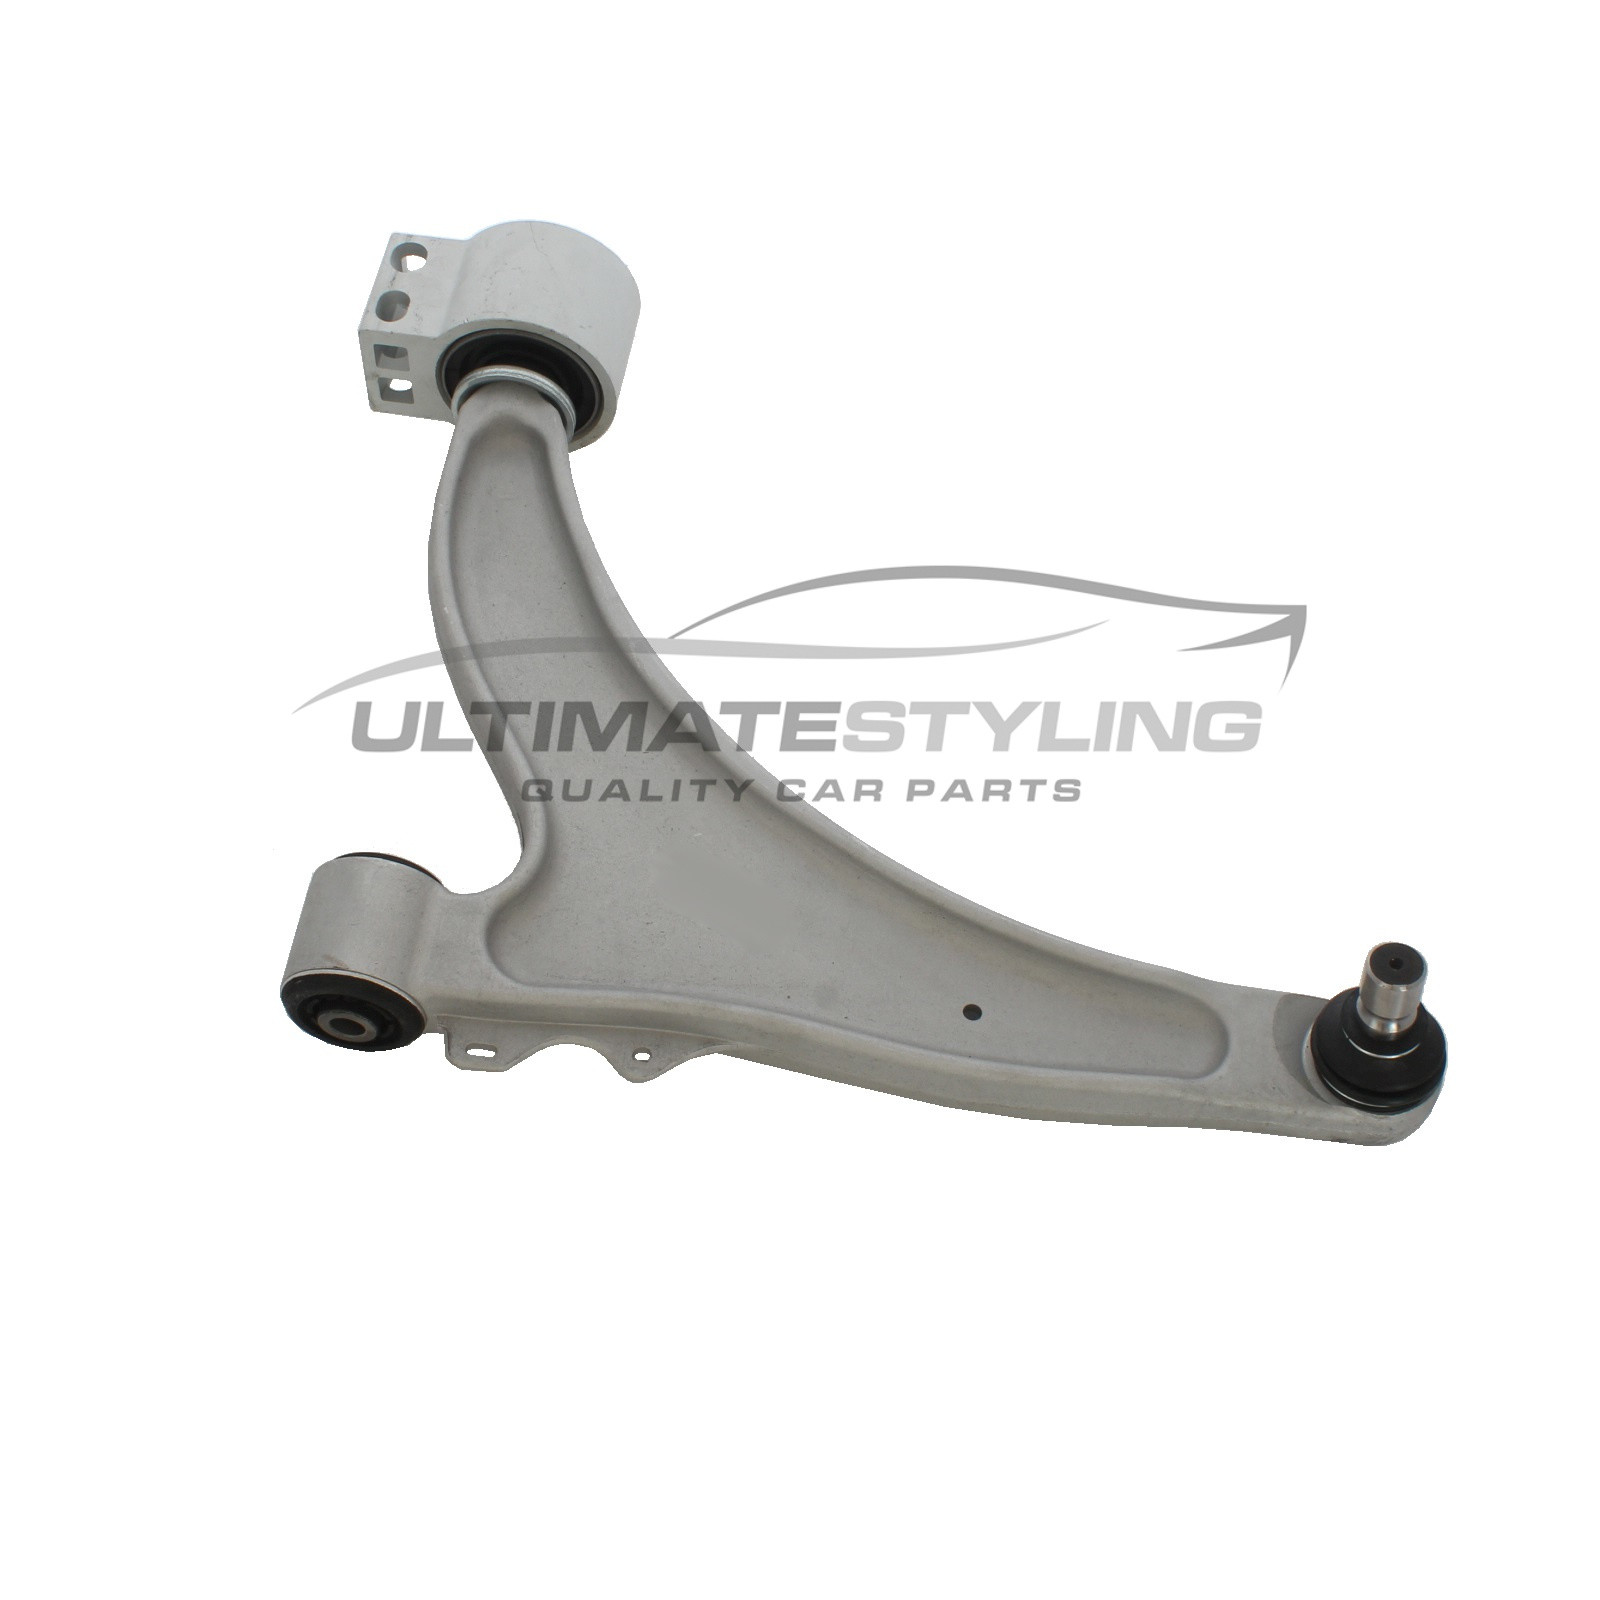 Vauxhall Insignia, Saab 9-5 Suspension Arm - Front Lower (LH)